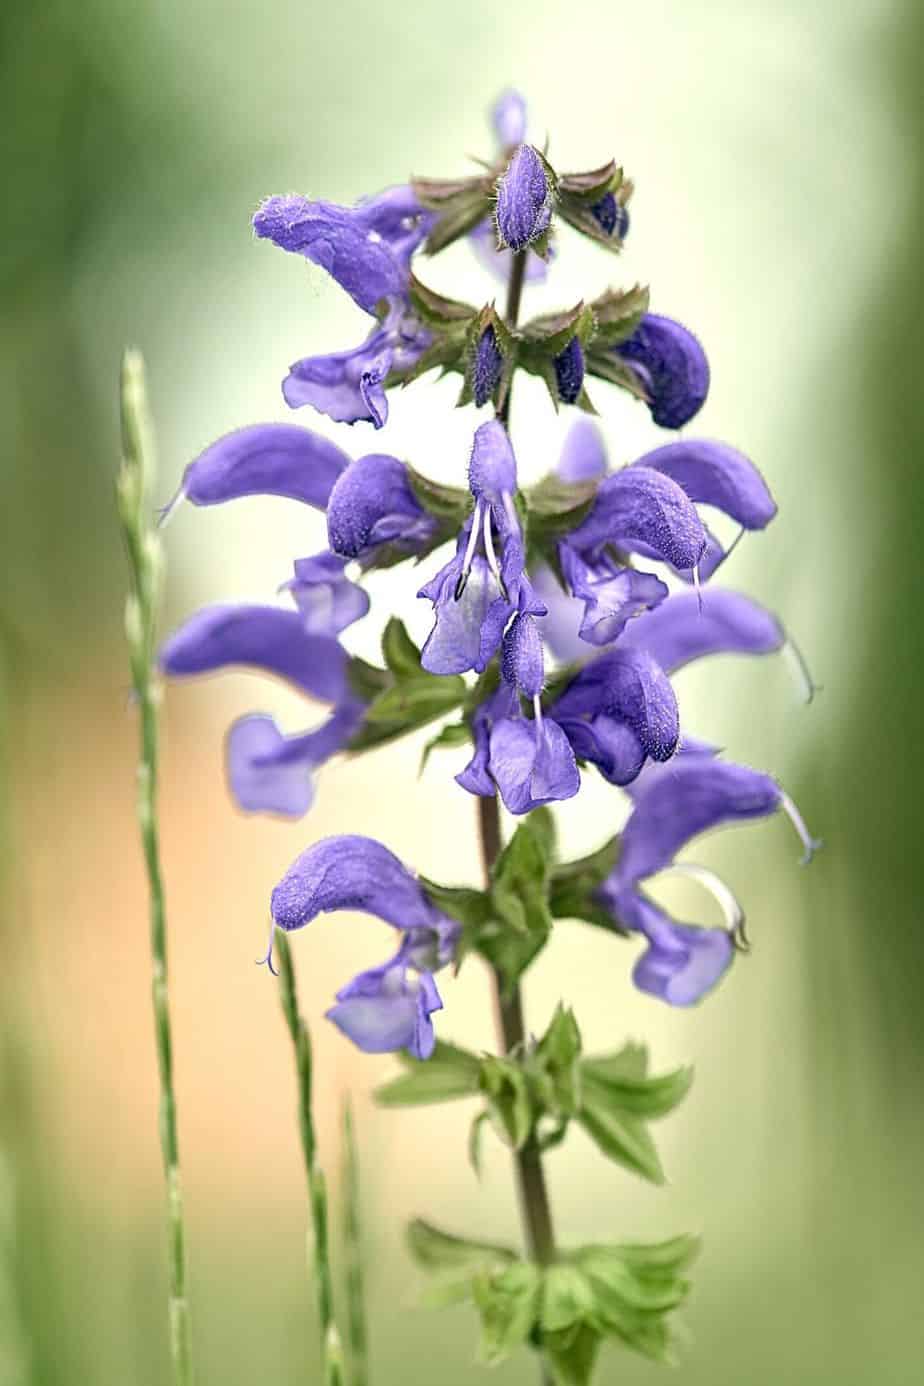 If you want to attract hummingbirds and bees to the west-facing side of the house, plant Meadow sage